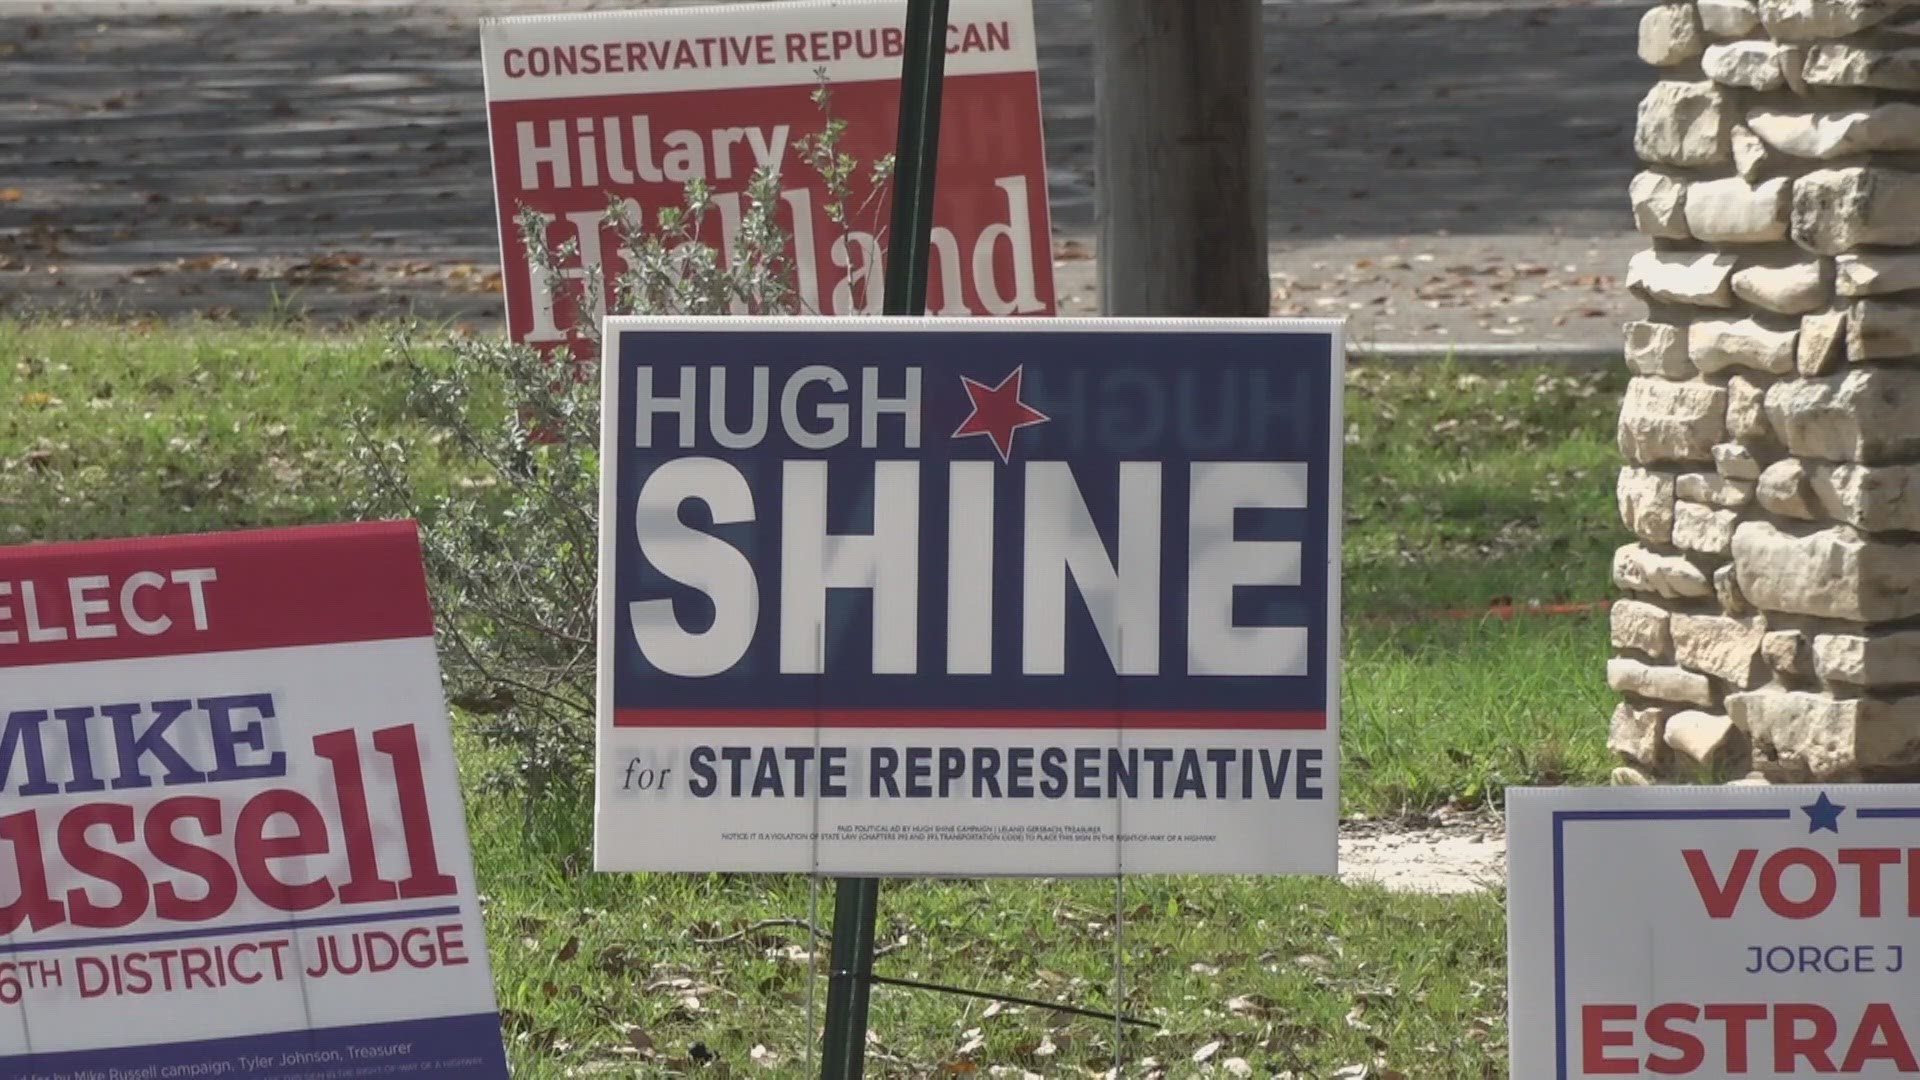 Hear what the candidates had to say prior to the big day.